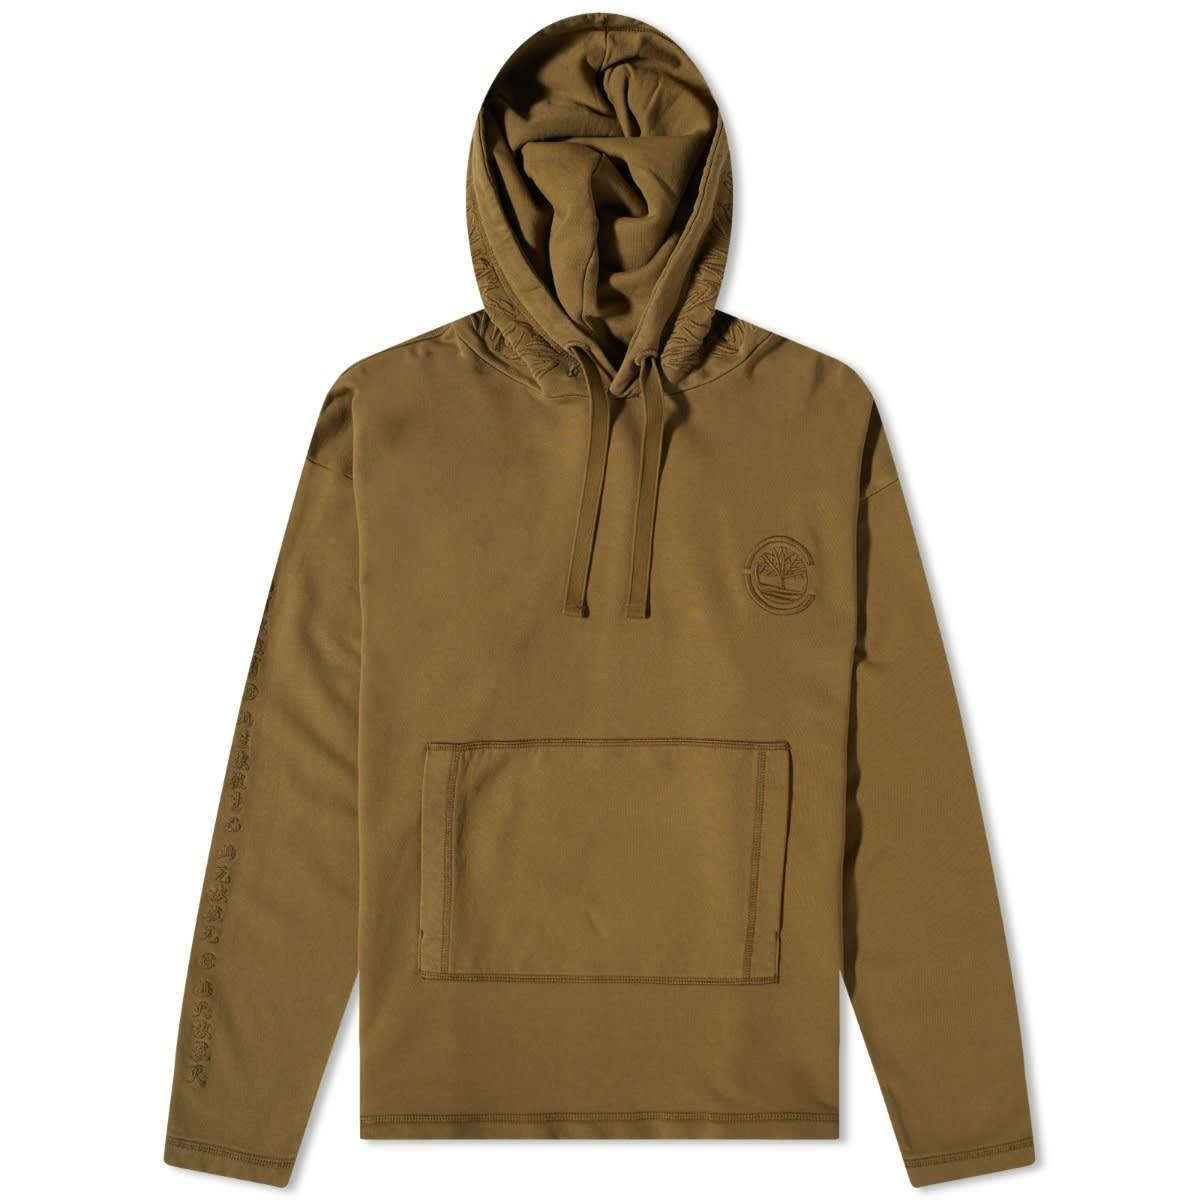 Timberland x CLOT Pullover Hoodie in Grape Leaf Timberland